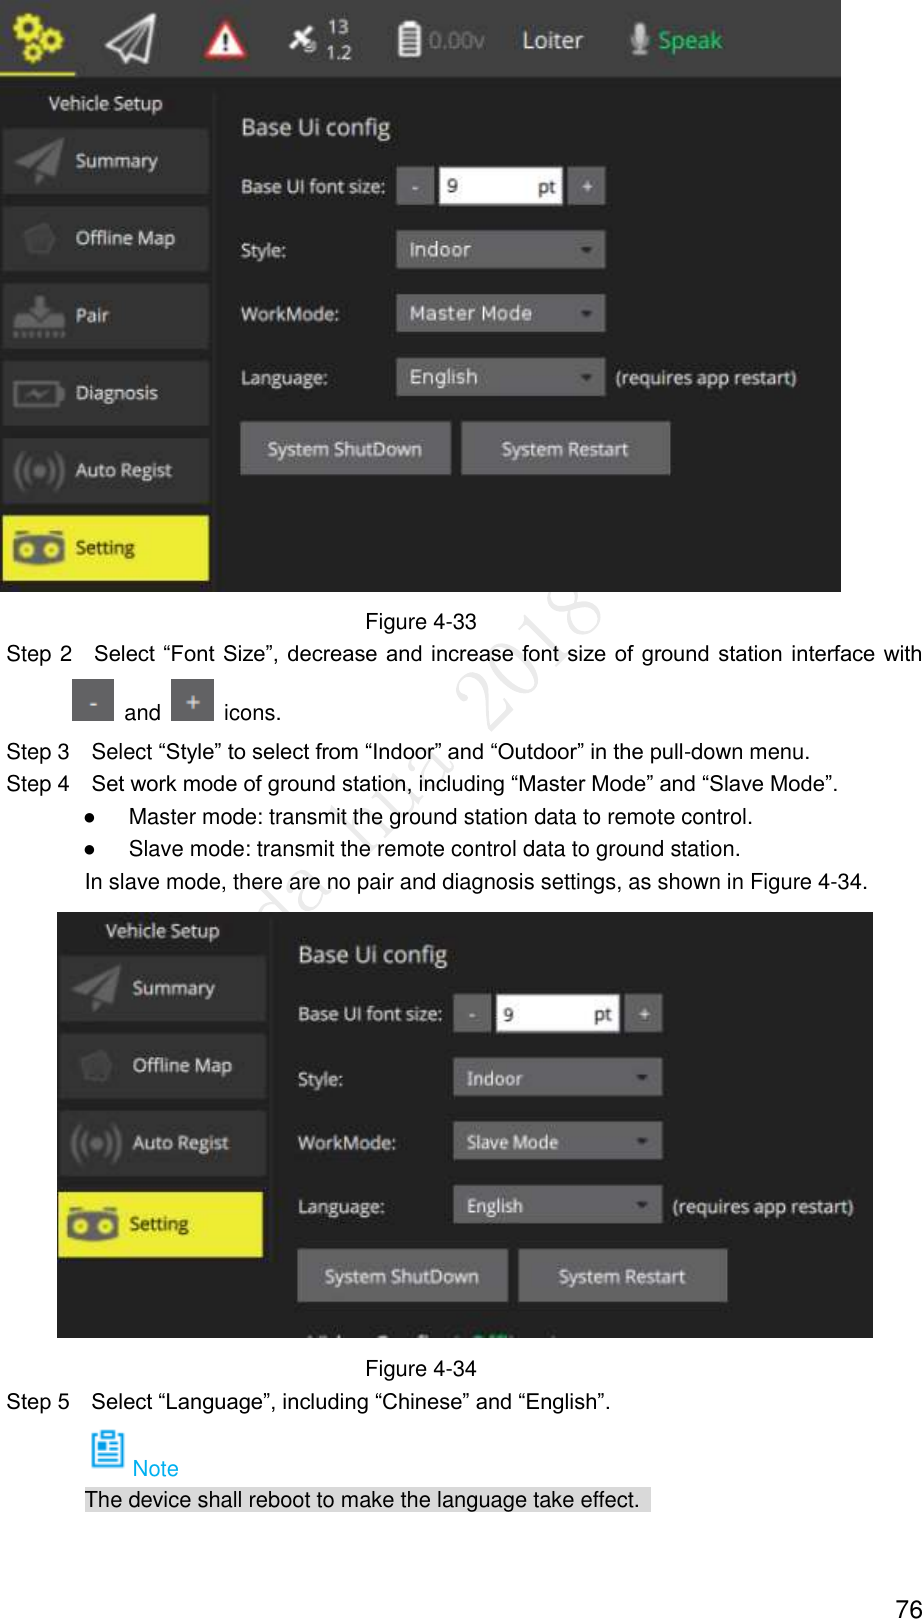  76  Figure 4-33                 Step 2    Select “Font Size”, decrease and increase font size of ground station  interface with  and    icons.                 Step 3    Select “Style” to select from “Indoor” and “Outdoor” in the pull-down menu.                   Step 4    Set work mode of ground station, including “Master Mode” and “Slave Mode”.                  ●      Master mode: transmit the ground station data to remote control.                  ●      Slave mode: transmit the remote control data to ground station.   In slave mode, there are no pair and diagnosis settings, as shown in Figure 4-34.  Figure 4-34         Step 5    Select “Language”, including “Chinese” and “English”.   Note The device shall reboot to make the language take effect.   